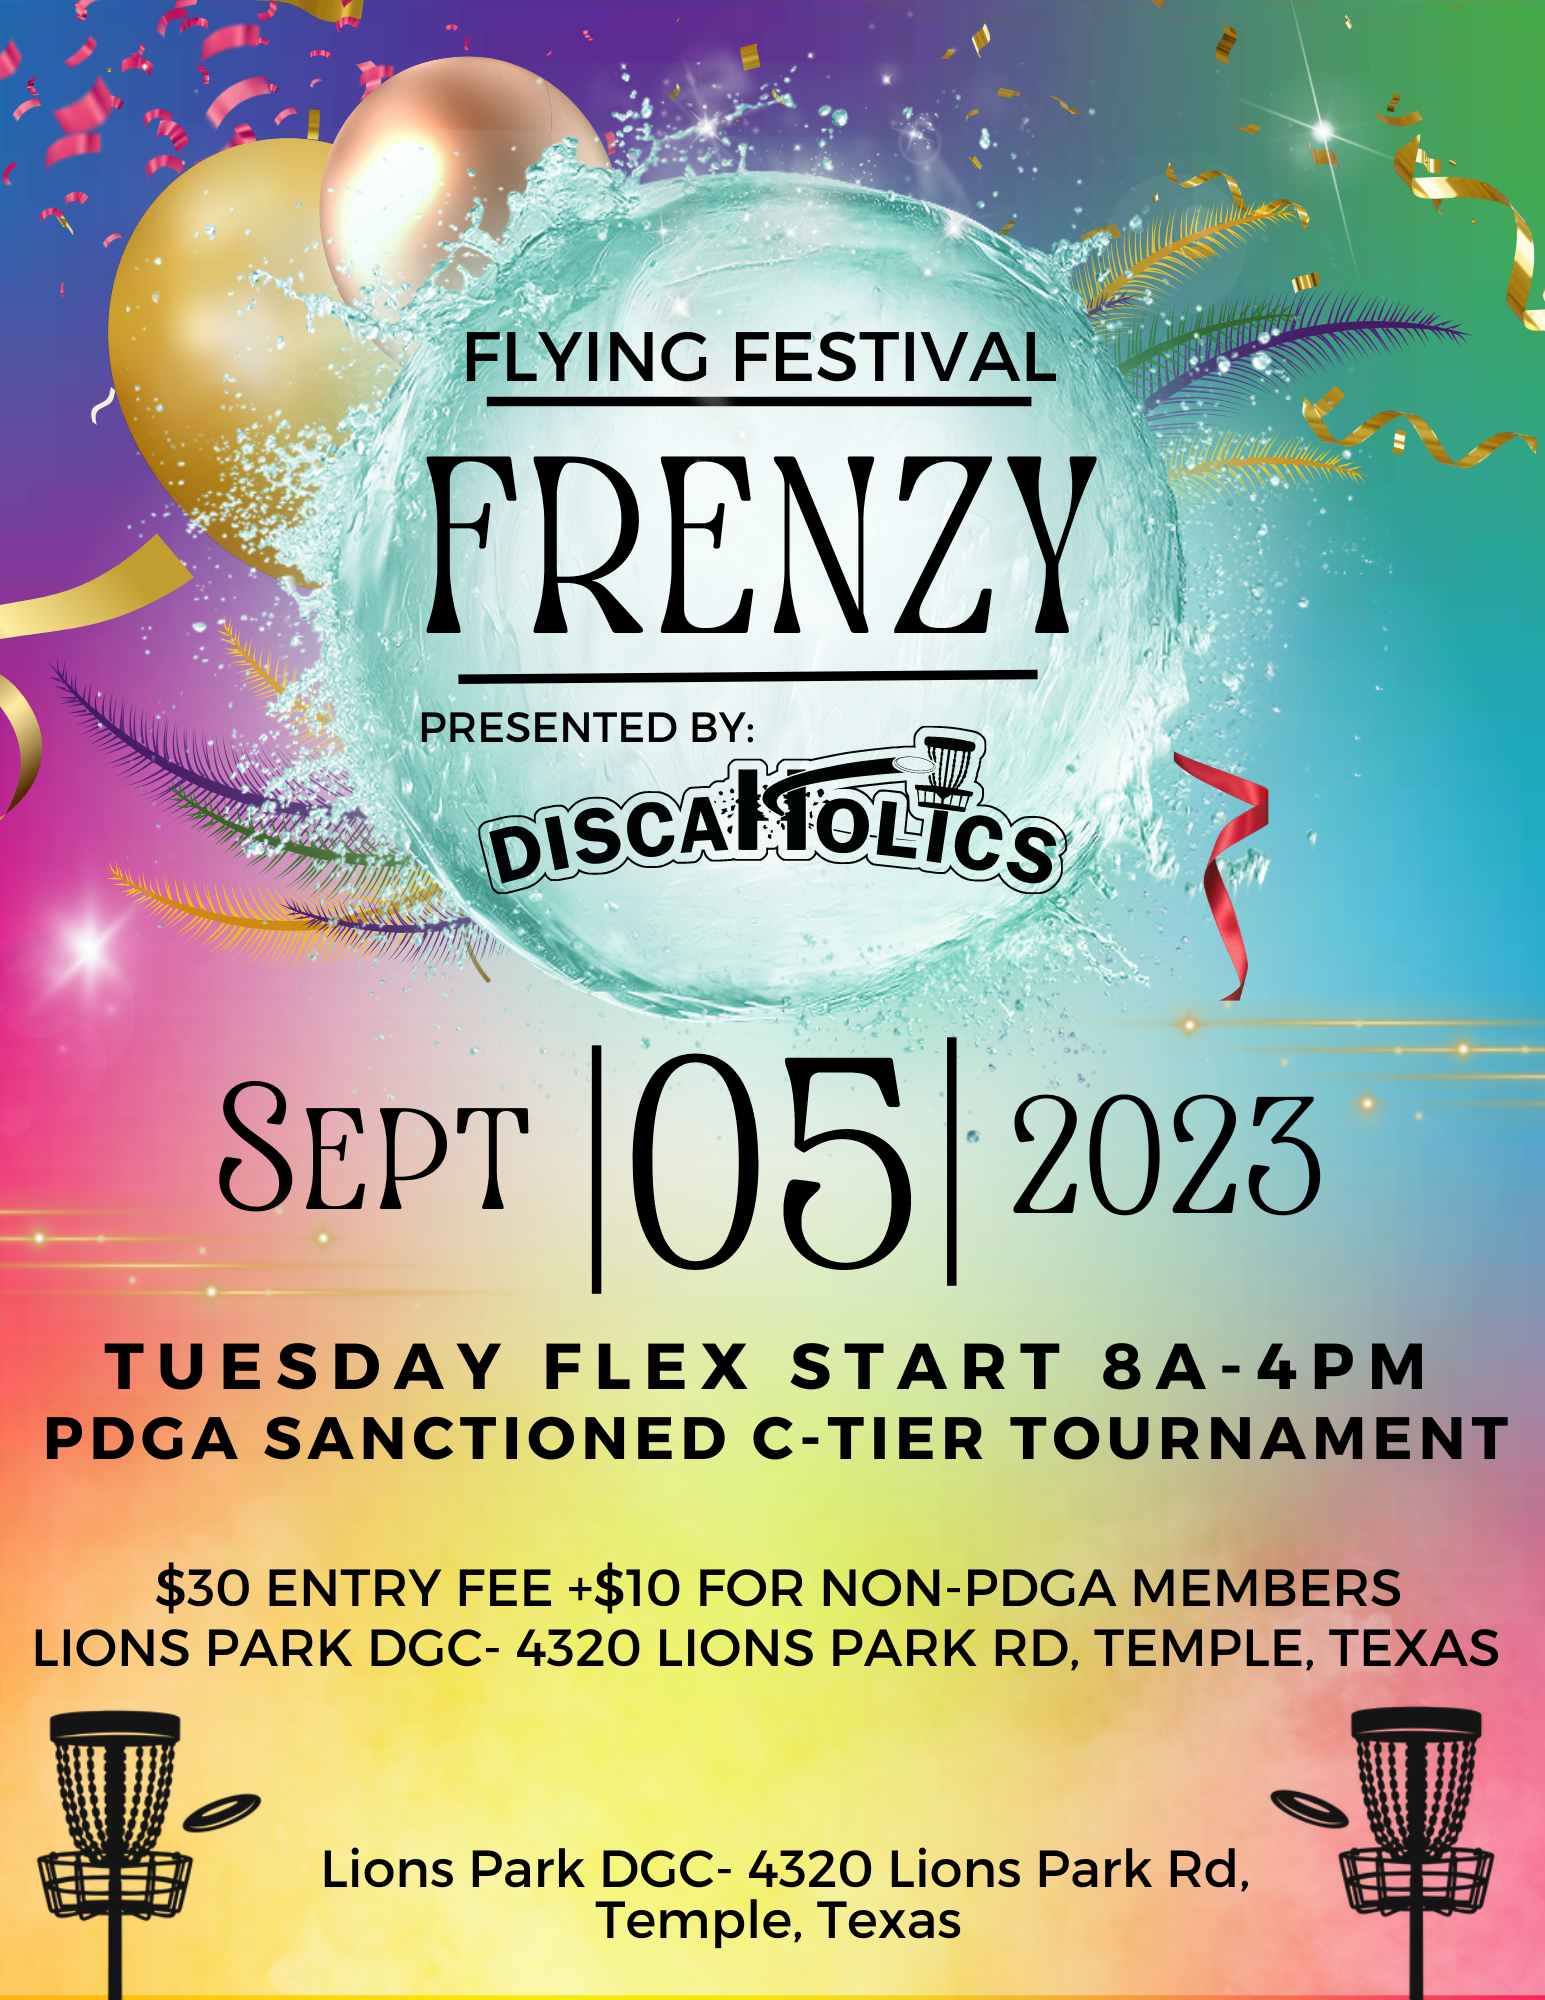 Tournament: Flying Festival Frenzy- Tuesday, Sept 5th, 2023